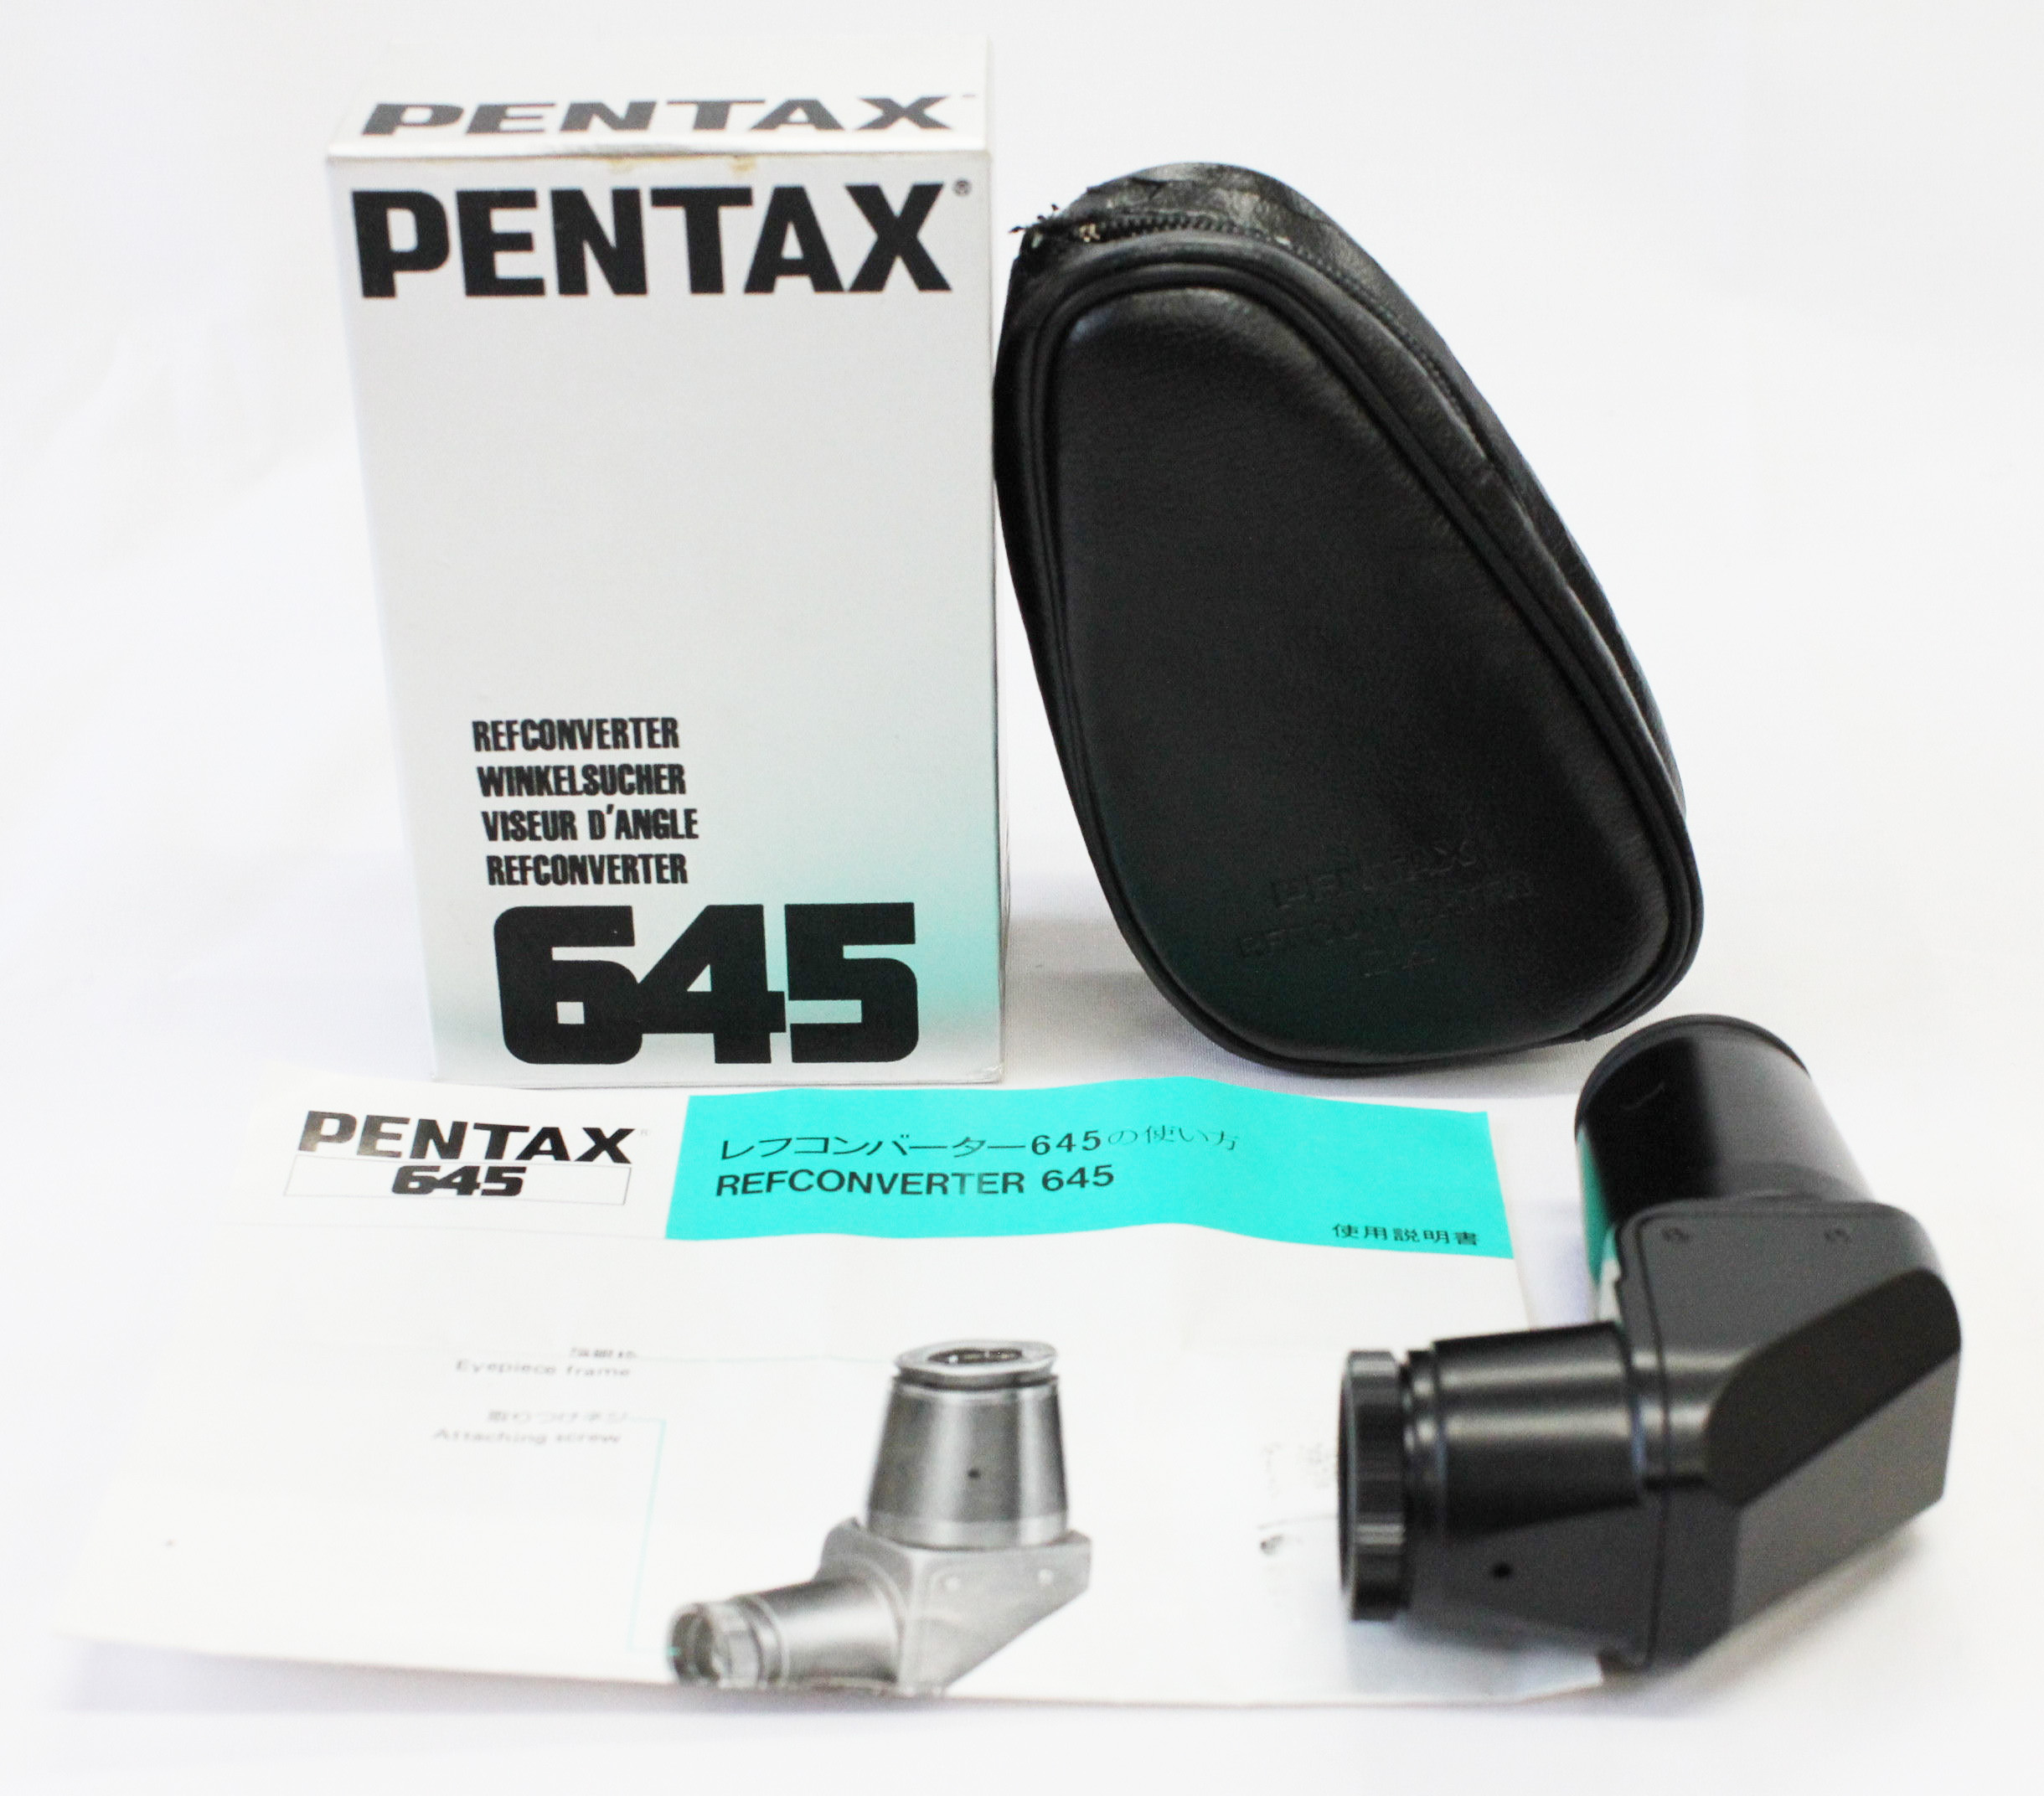 Japan Used Camera Shop | [Mint with Box] Pentax 645 Refconverter Angle Finder from Japan